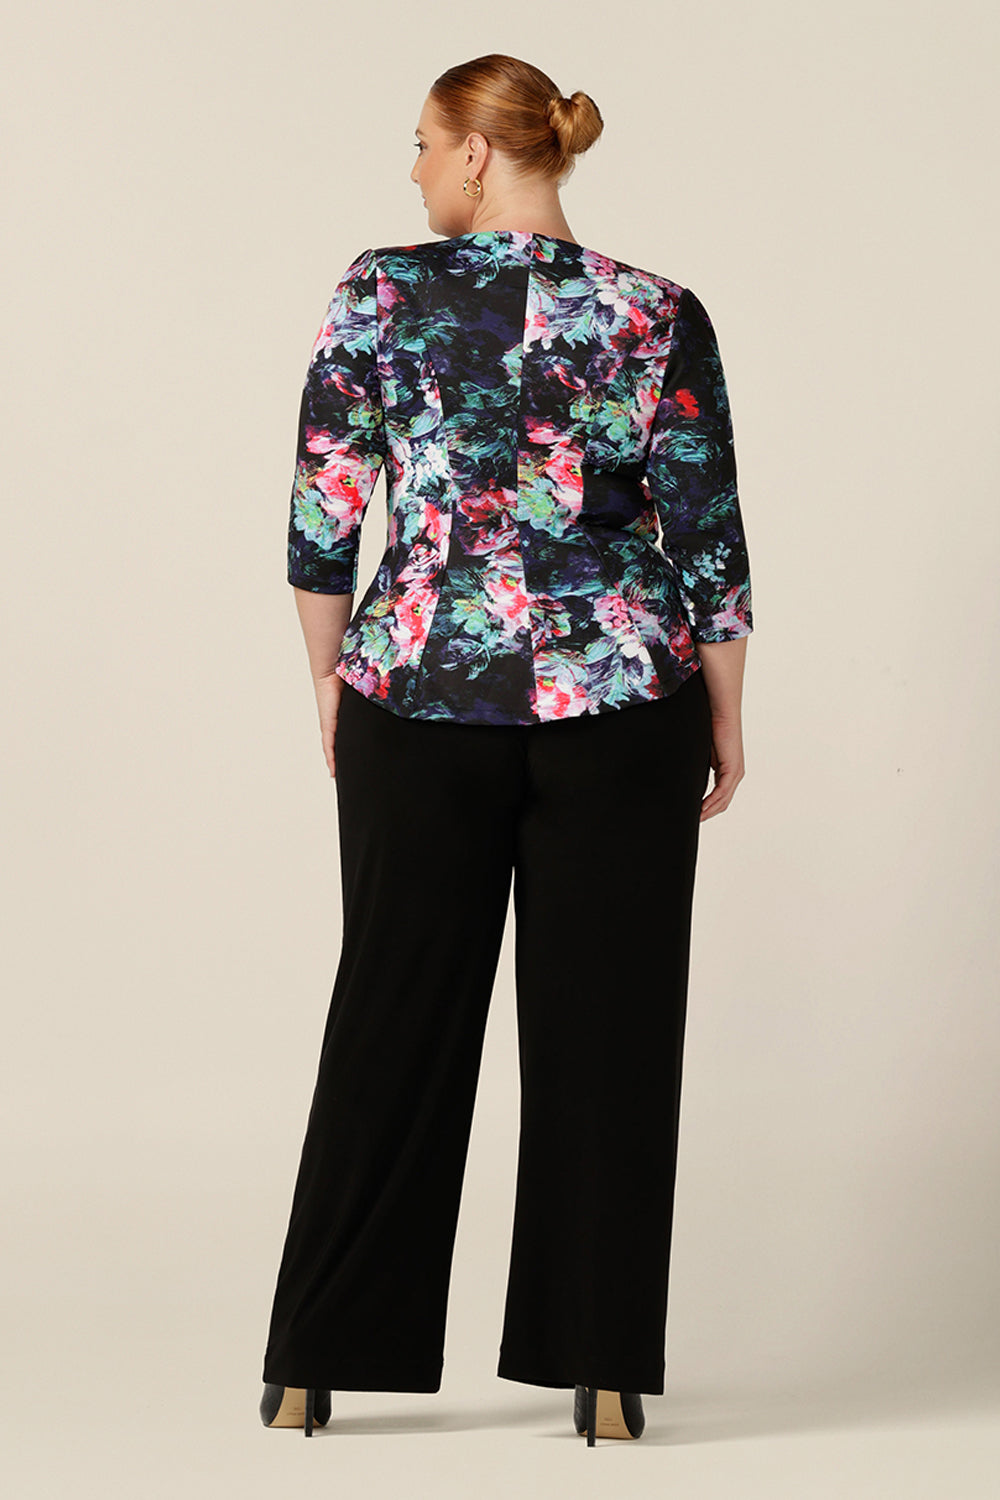 Back view of a soft tailoring top, by Australian and New Zealand women's clothing brand, L&F, the Saxon Top has a round neckline, 3/4 sleeves and tailored panelling. The stretch scuba fabric makes for comfortable workwear tailoring, as shown on this fuller figure woman. Shop now with free shipping to New Zealand.